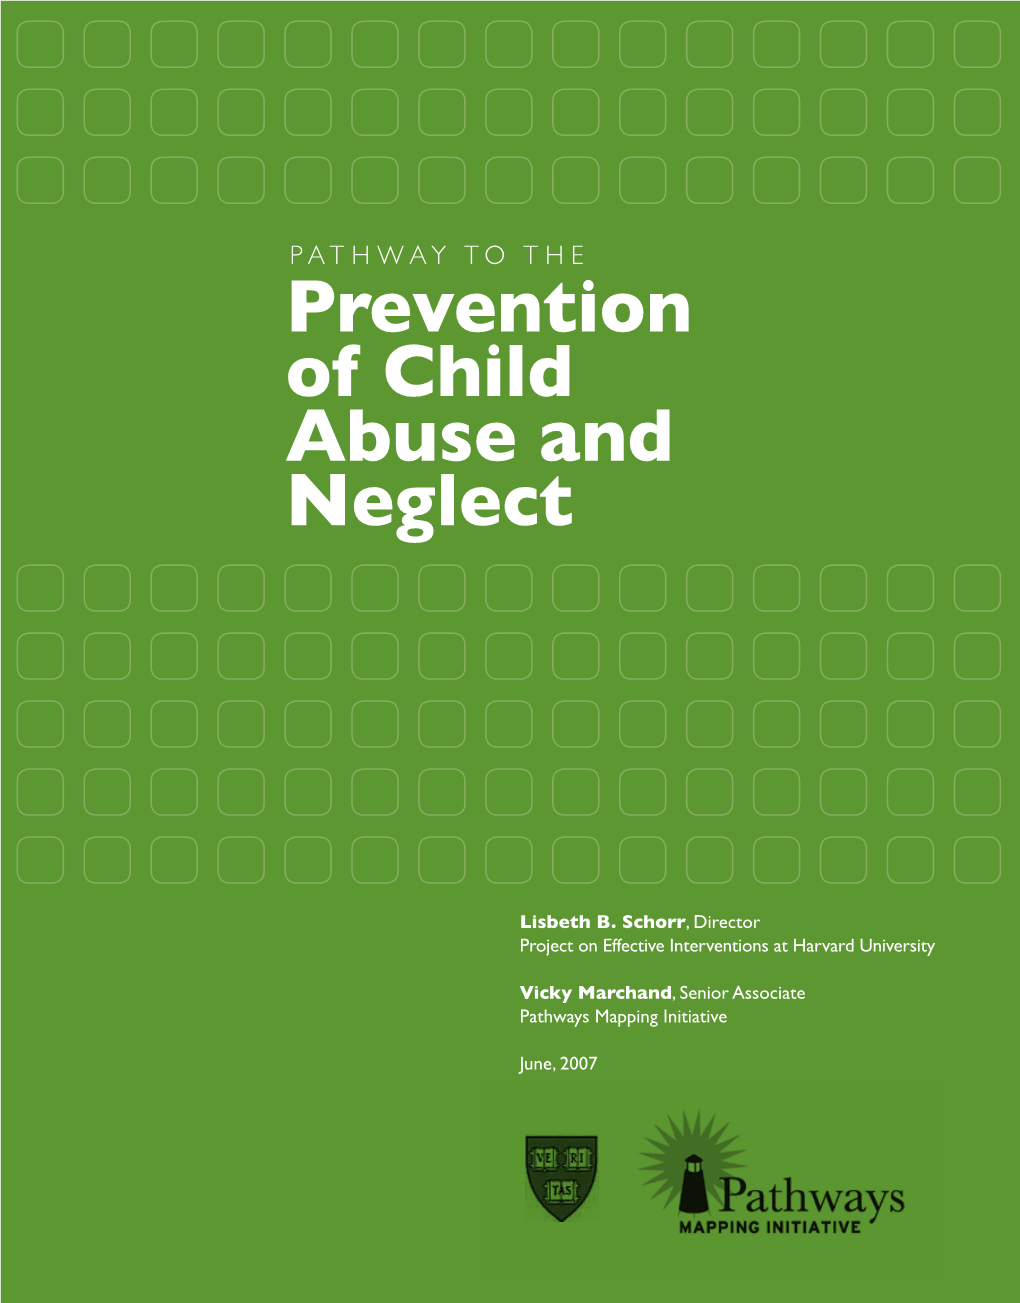 Pathway to the Prevention of Child Abuse and Neglect